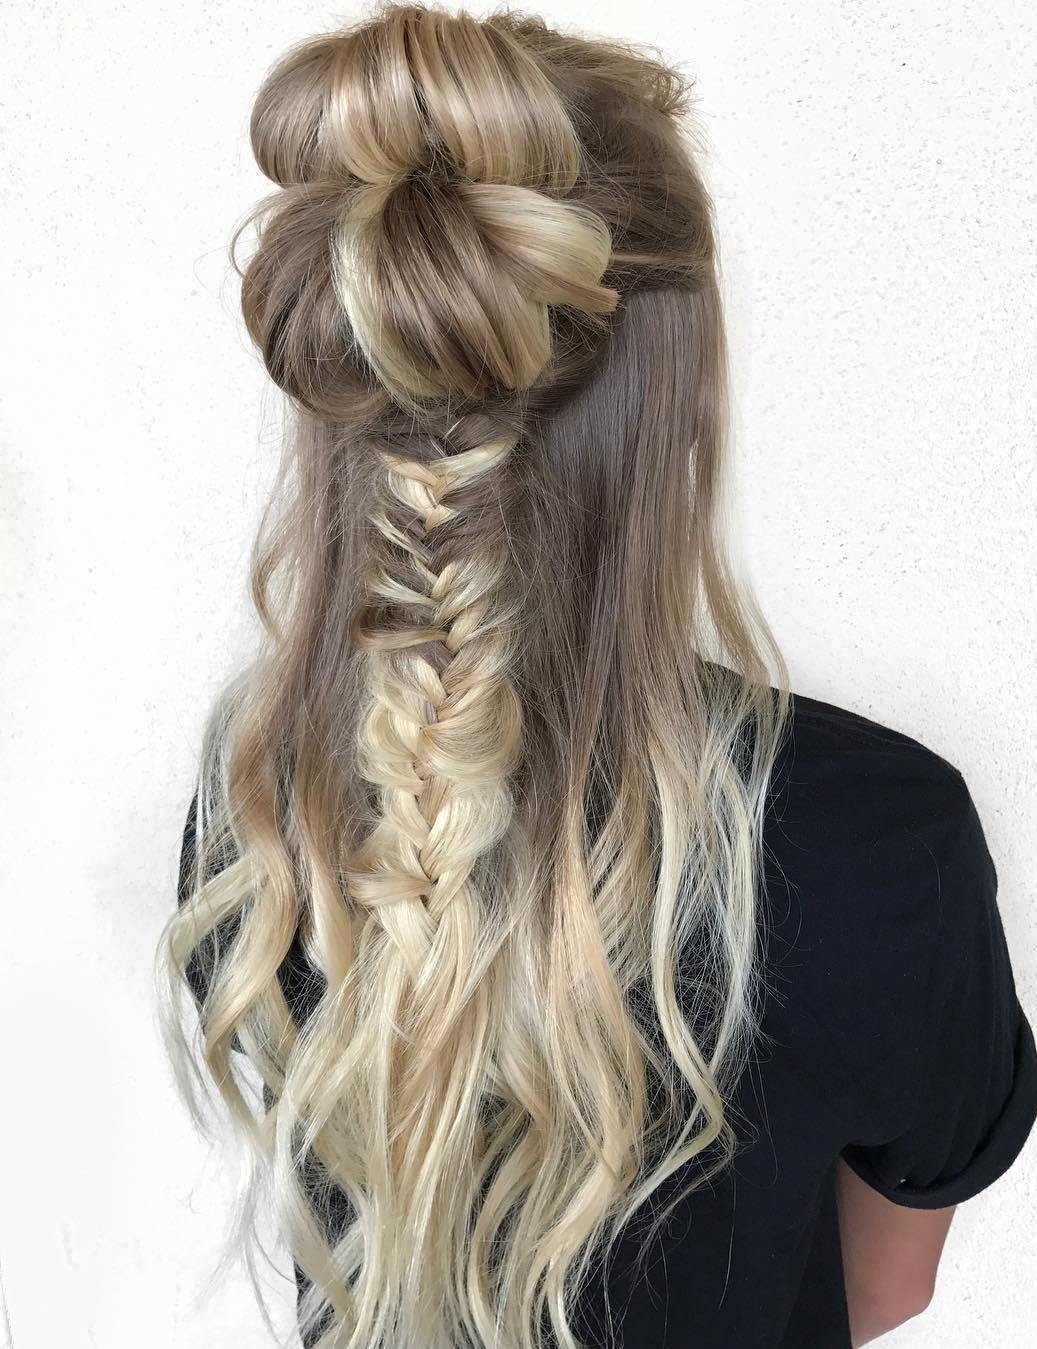 Double Half Up Bun With A Messy Braid